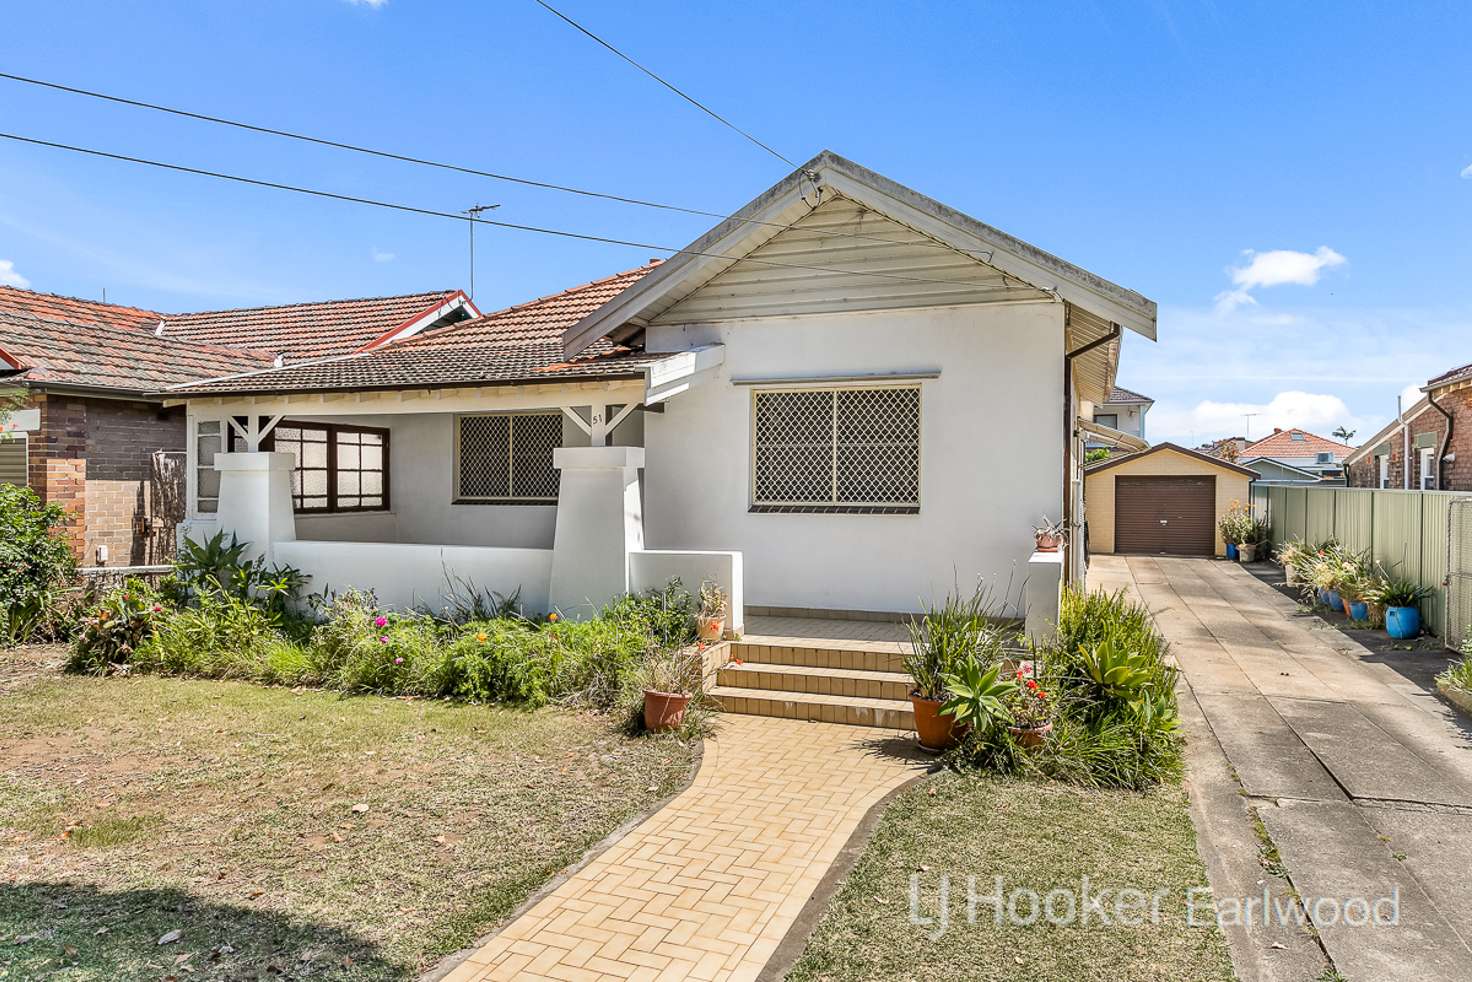 Main view of Homely house listing, 51 Earlwood Avenue, Earlwood NSW 2206